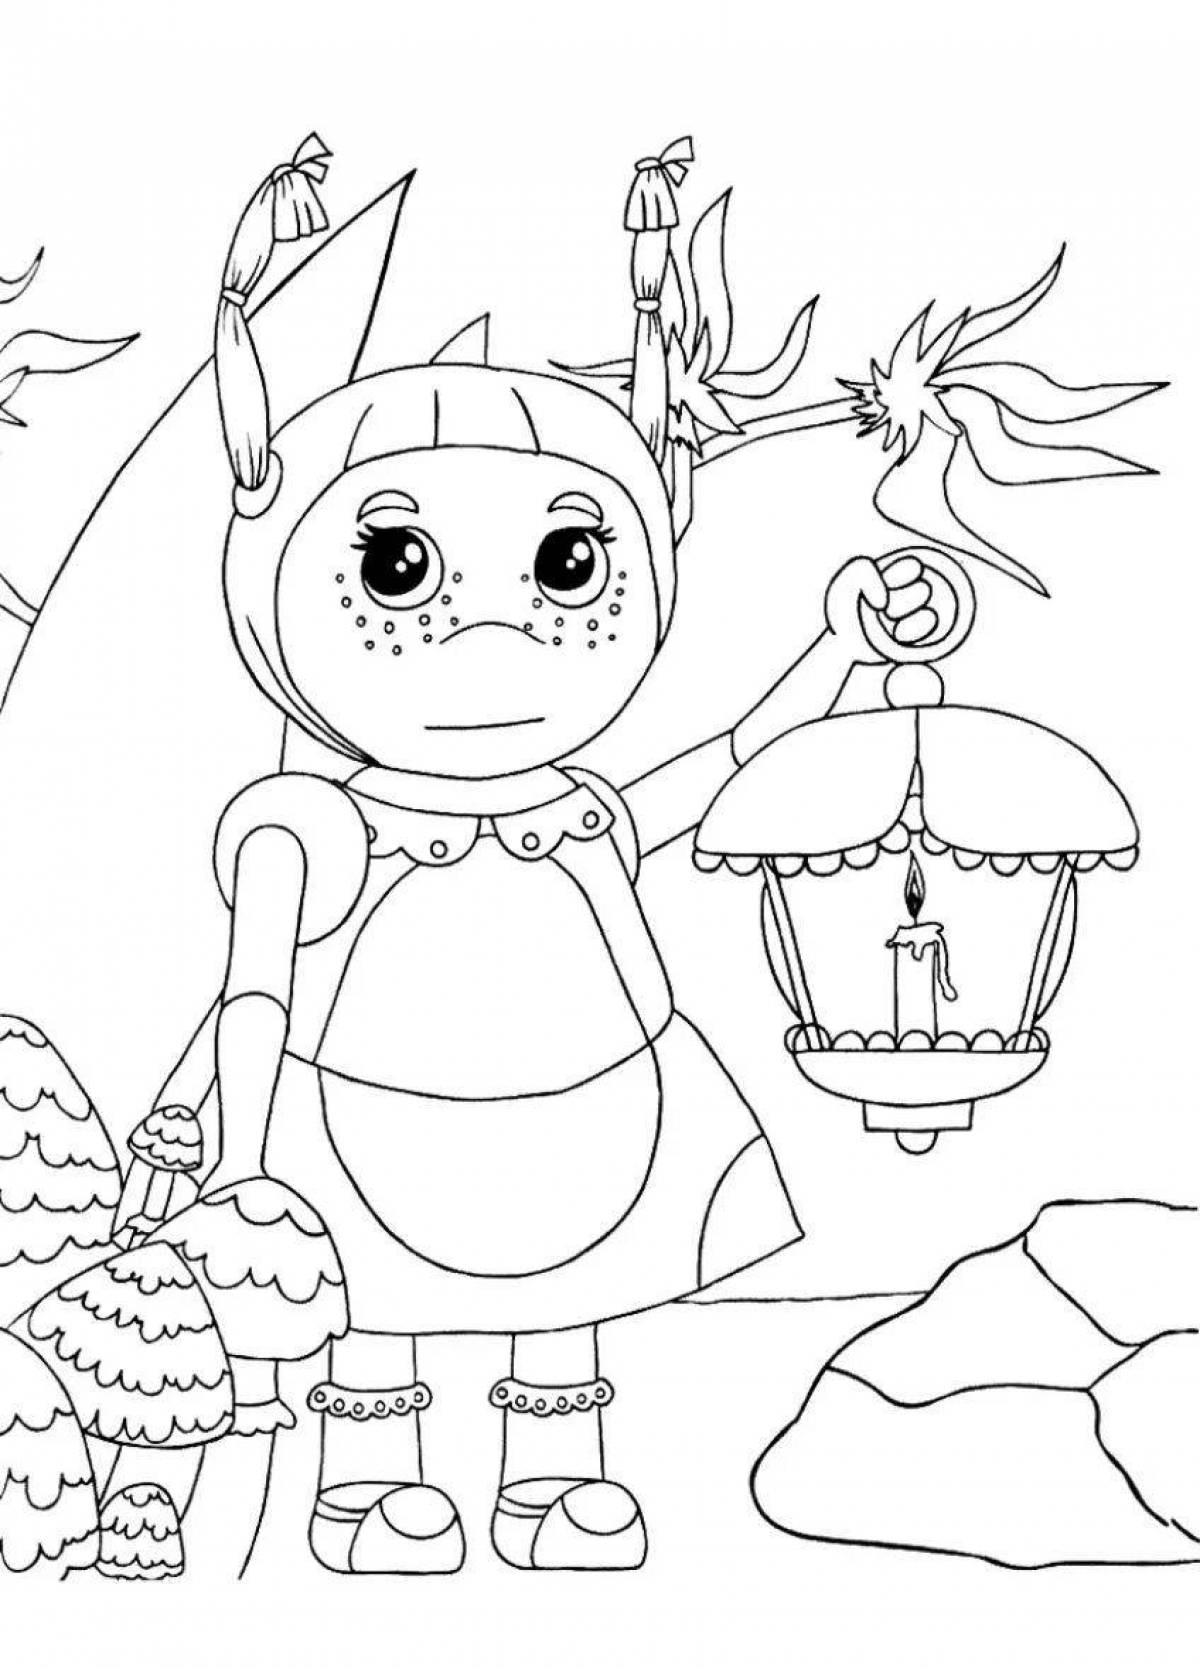 Creative coloring Luntik for children 6-7 years old